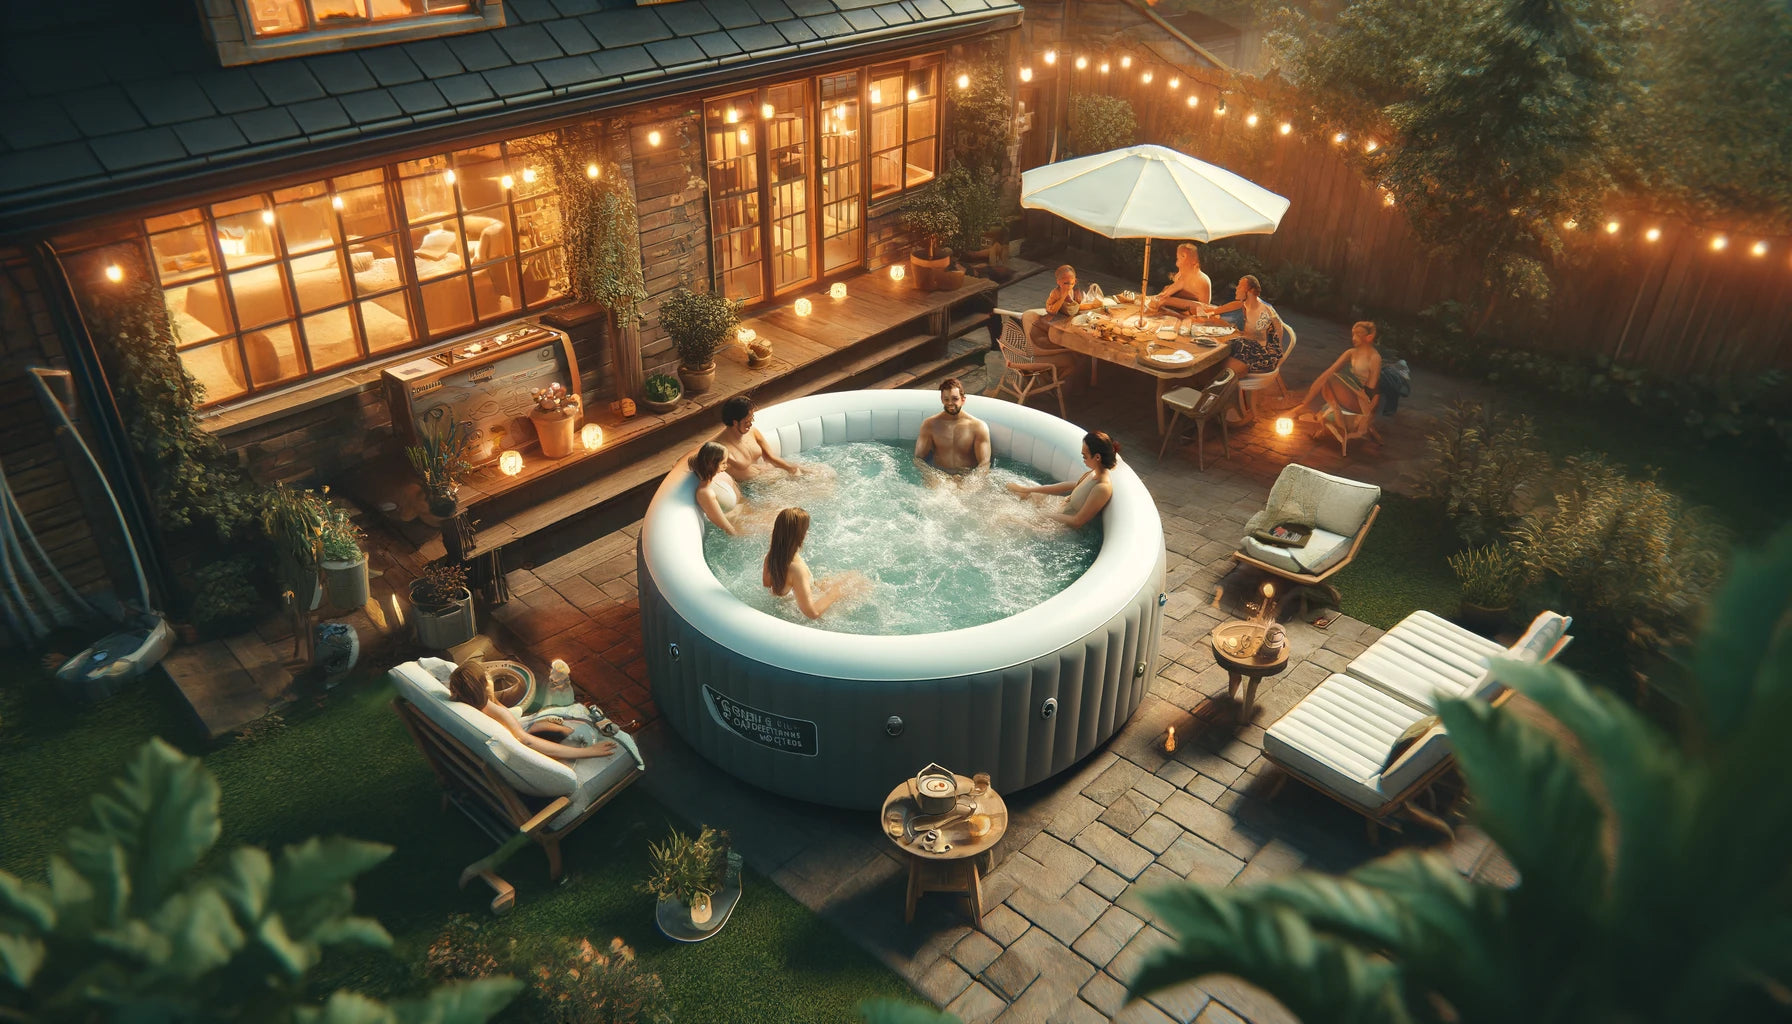 From Setup to Soak: Quick Tips for First-Time Inflatable Hot Tub Owners